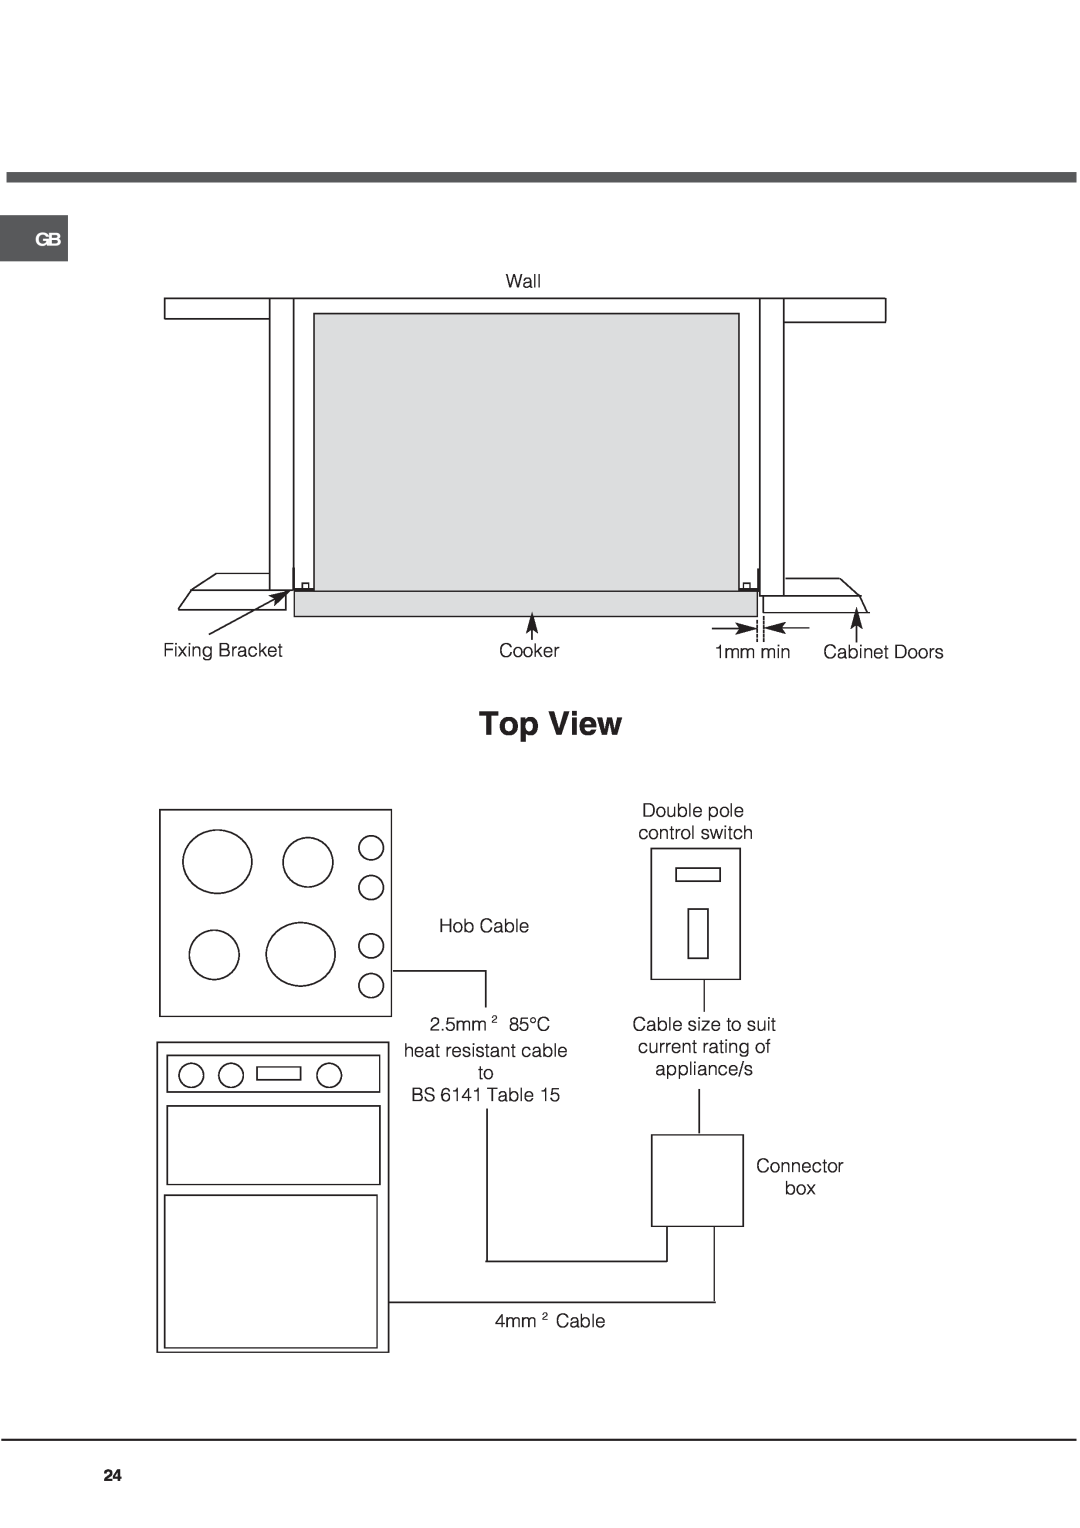 Hotpoint UY46X/2 UH53 Top View, Wall, Fixing Bracket, Cooker, 1mm min, Hob Cable, 2.5mm 2 85C, appliance/s, BS 6141 Table 